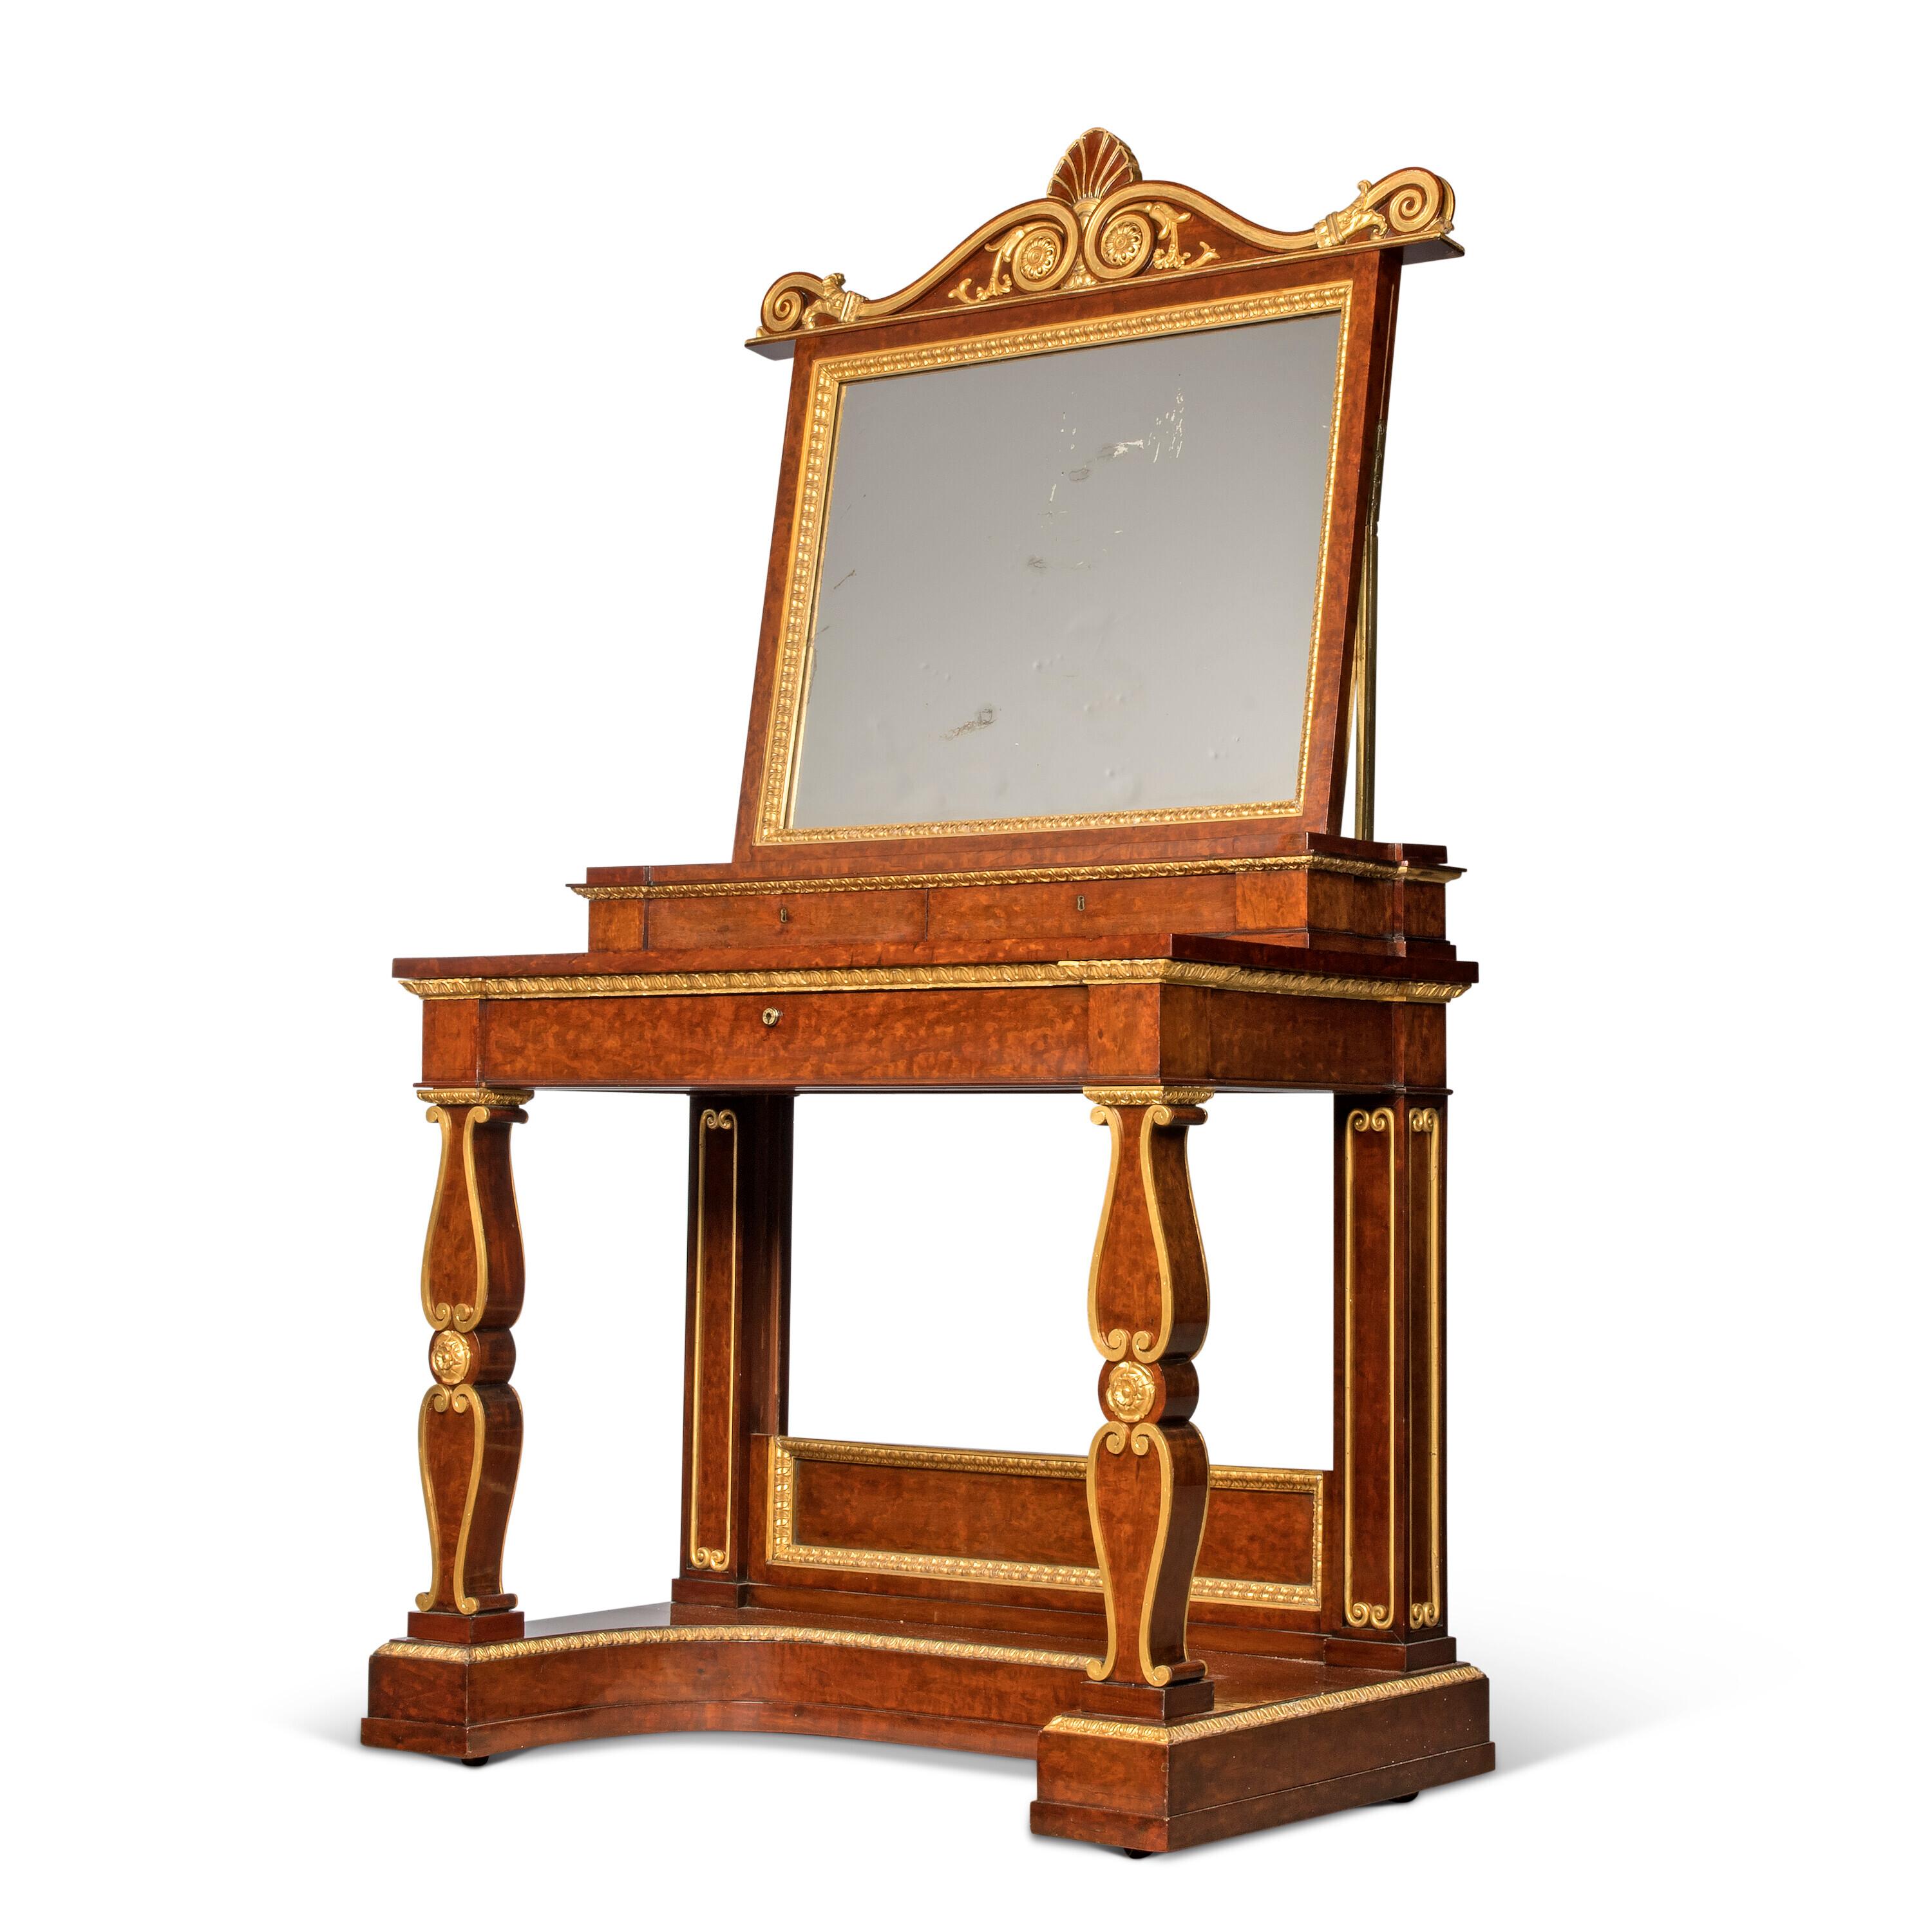 19th Century  An Exceptional English Regency Dressing Table with a Royal Family Provenance